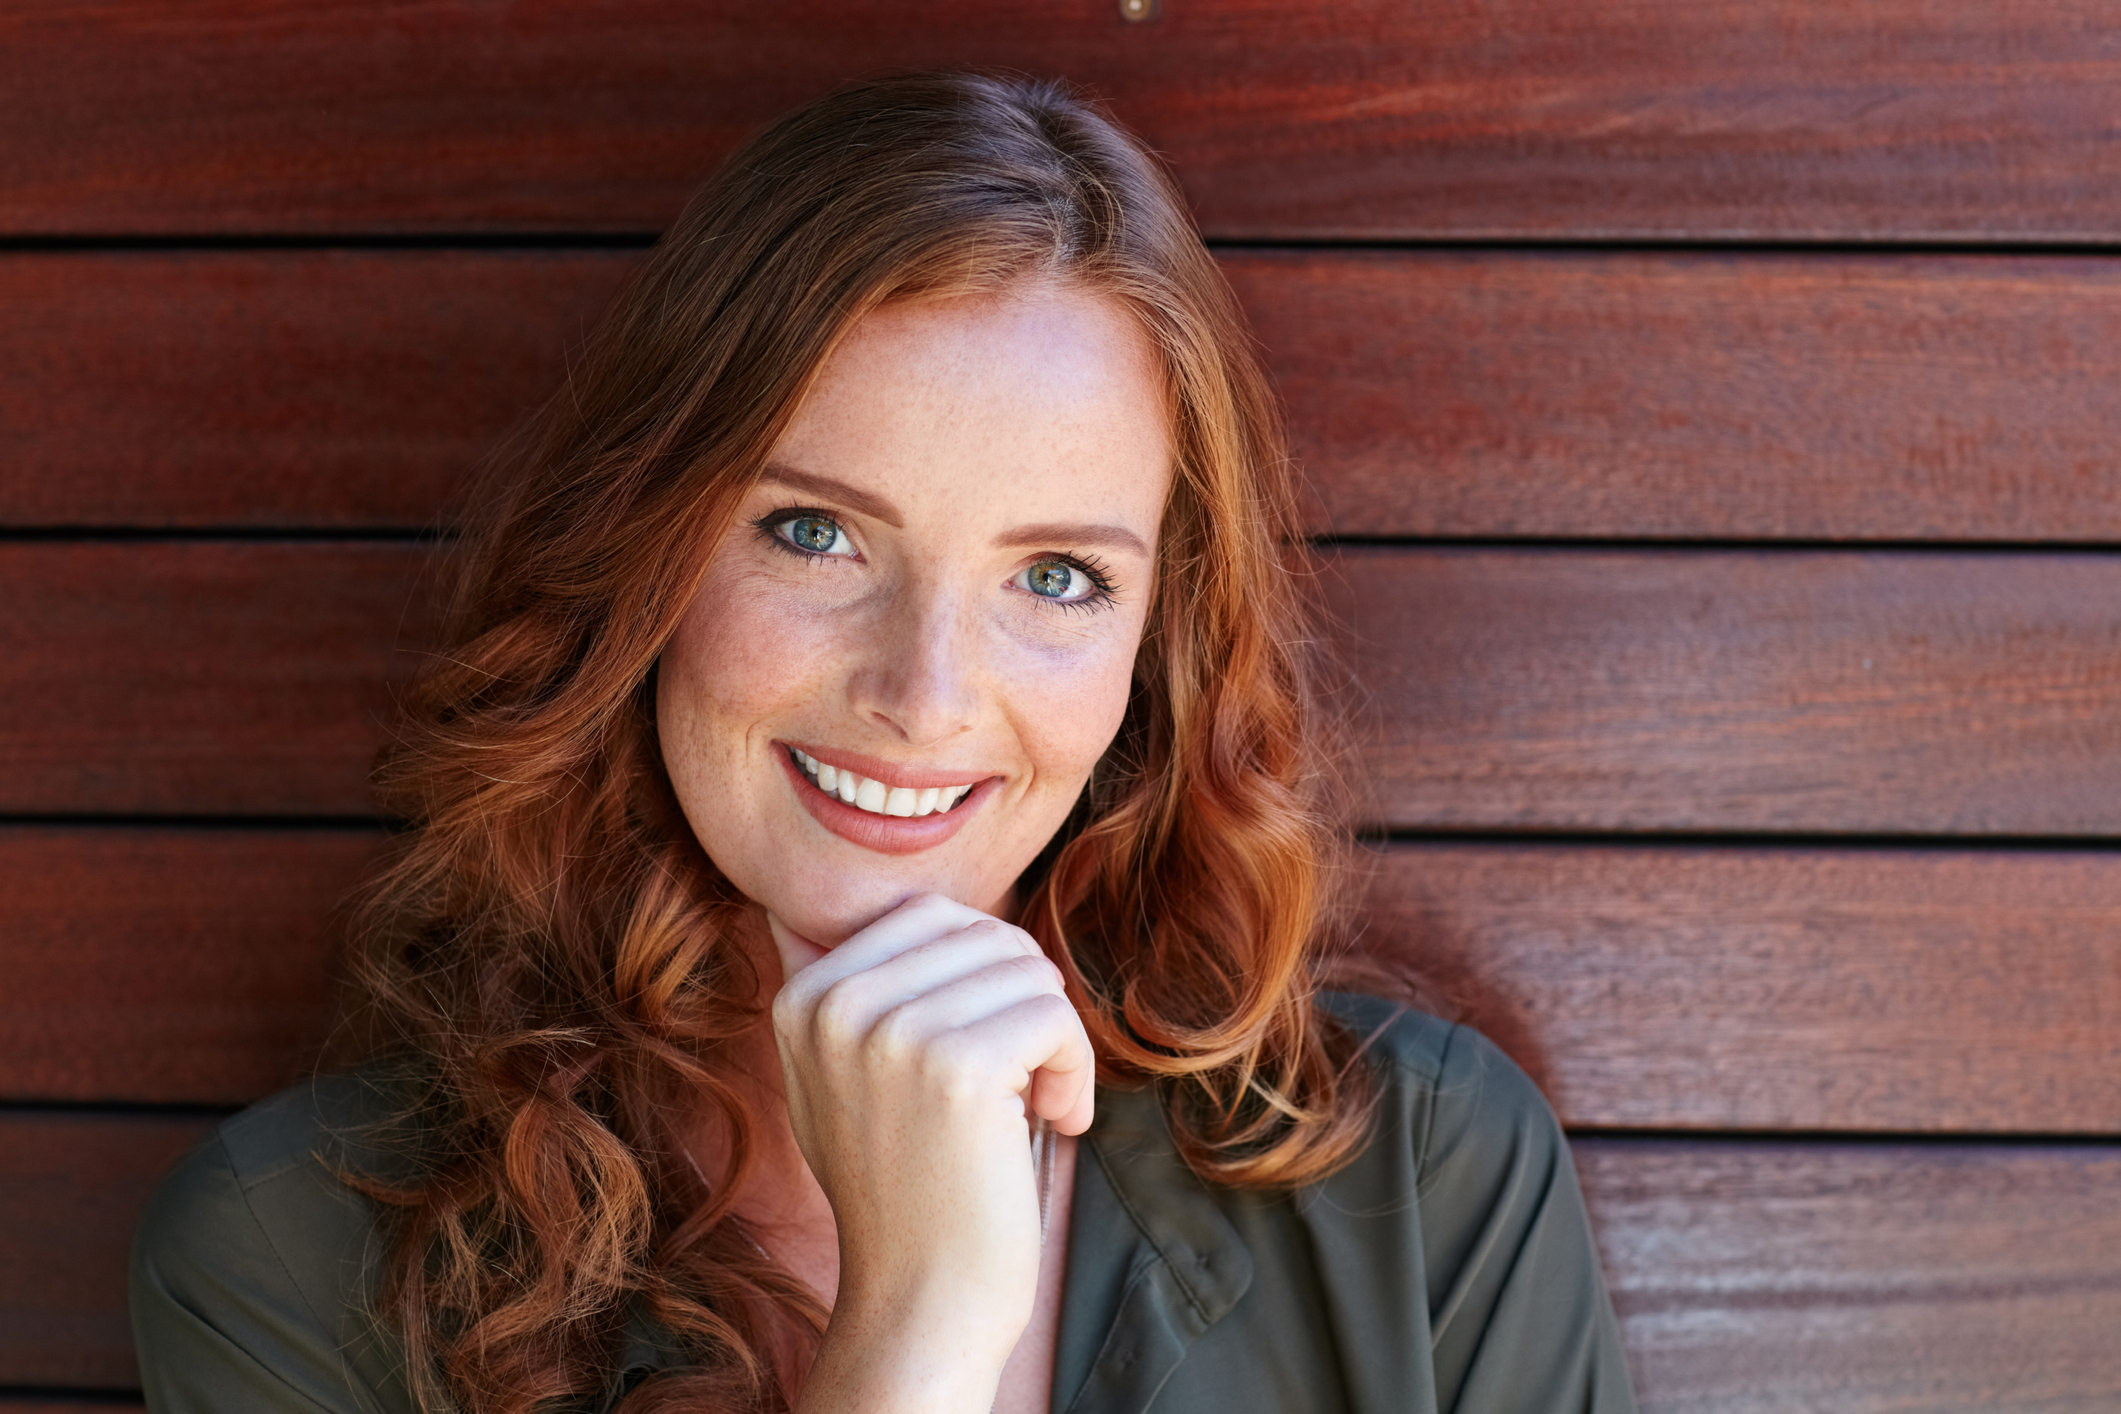 Woman with red hair posing in front of a wood wall while smiling and touching her chin